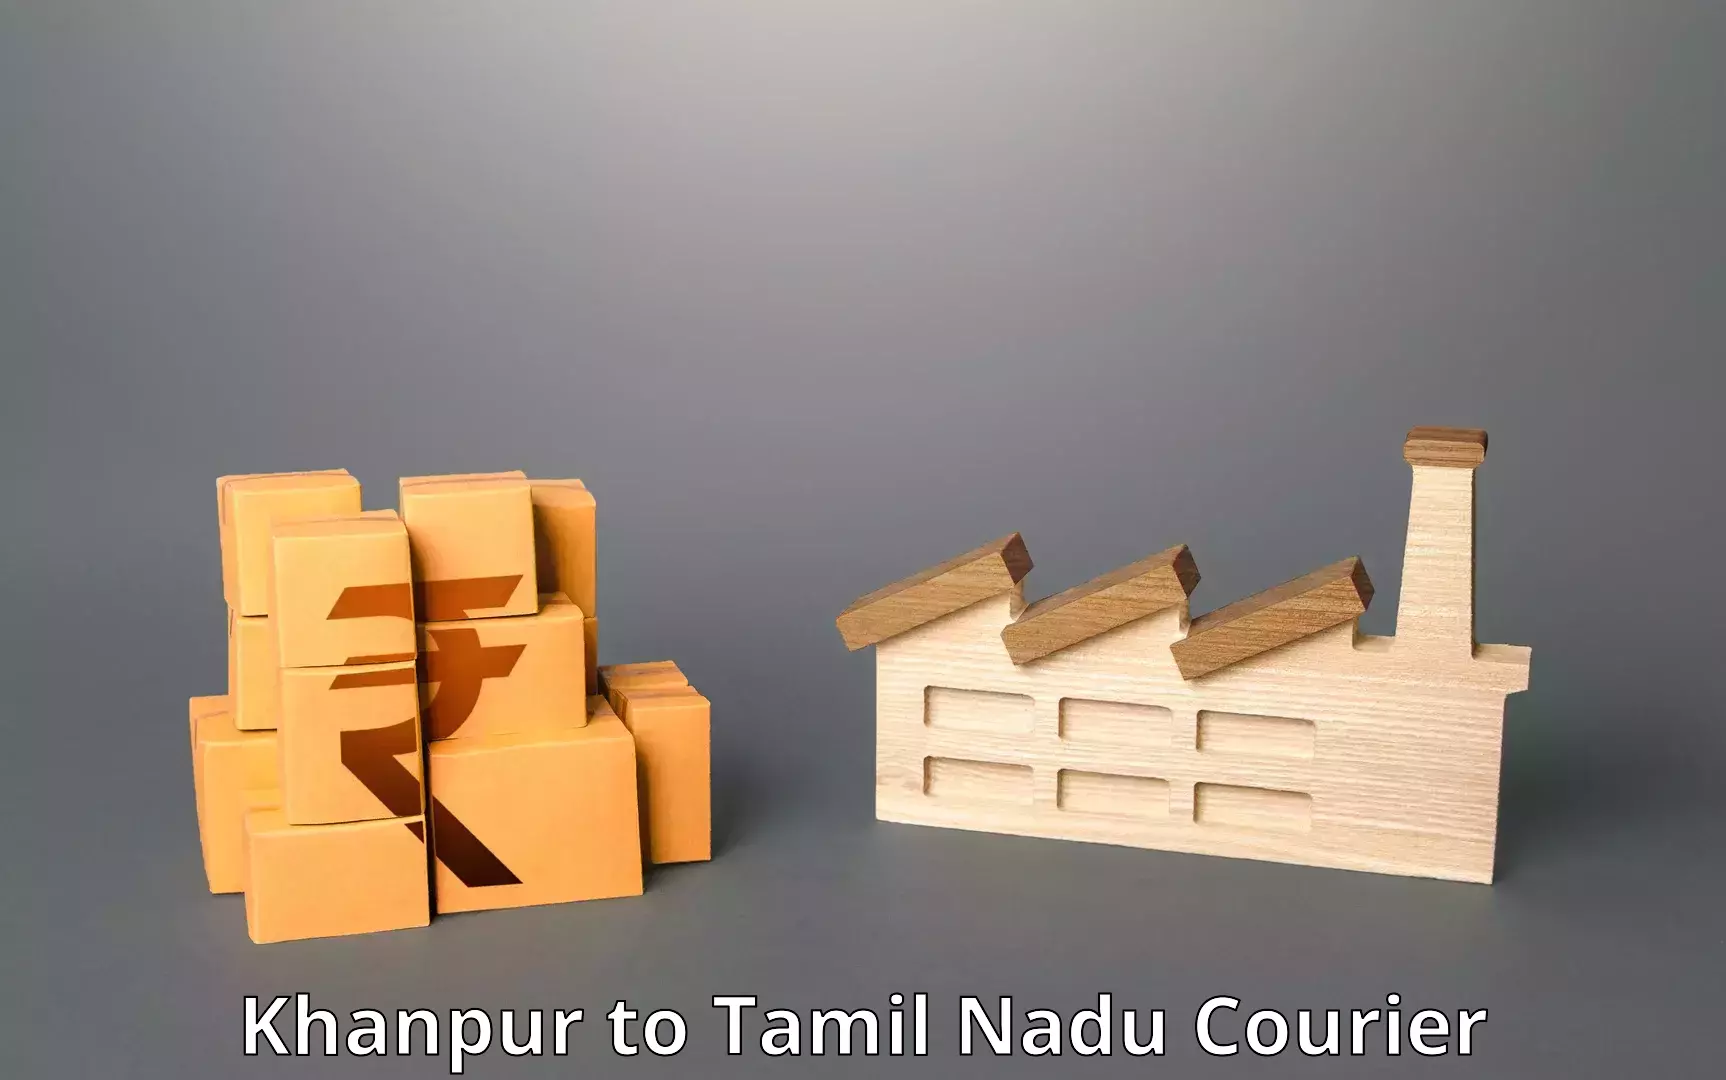 On-demand delivery Khanpur to Karur